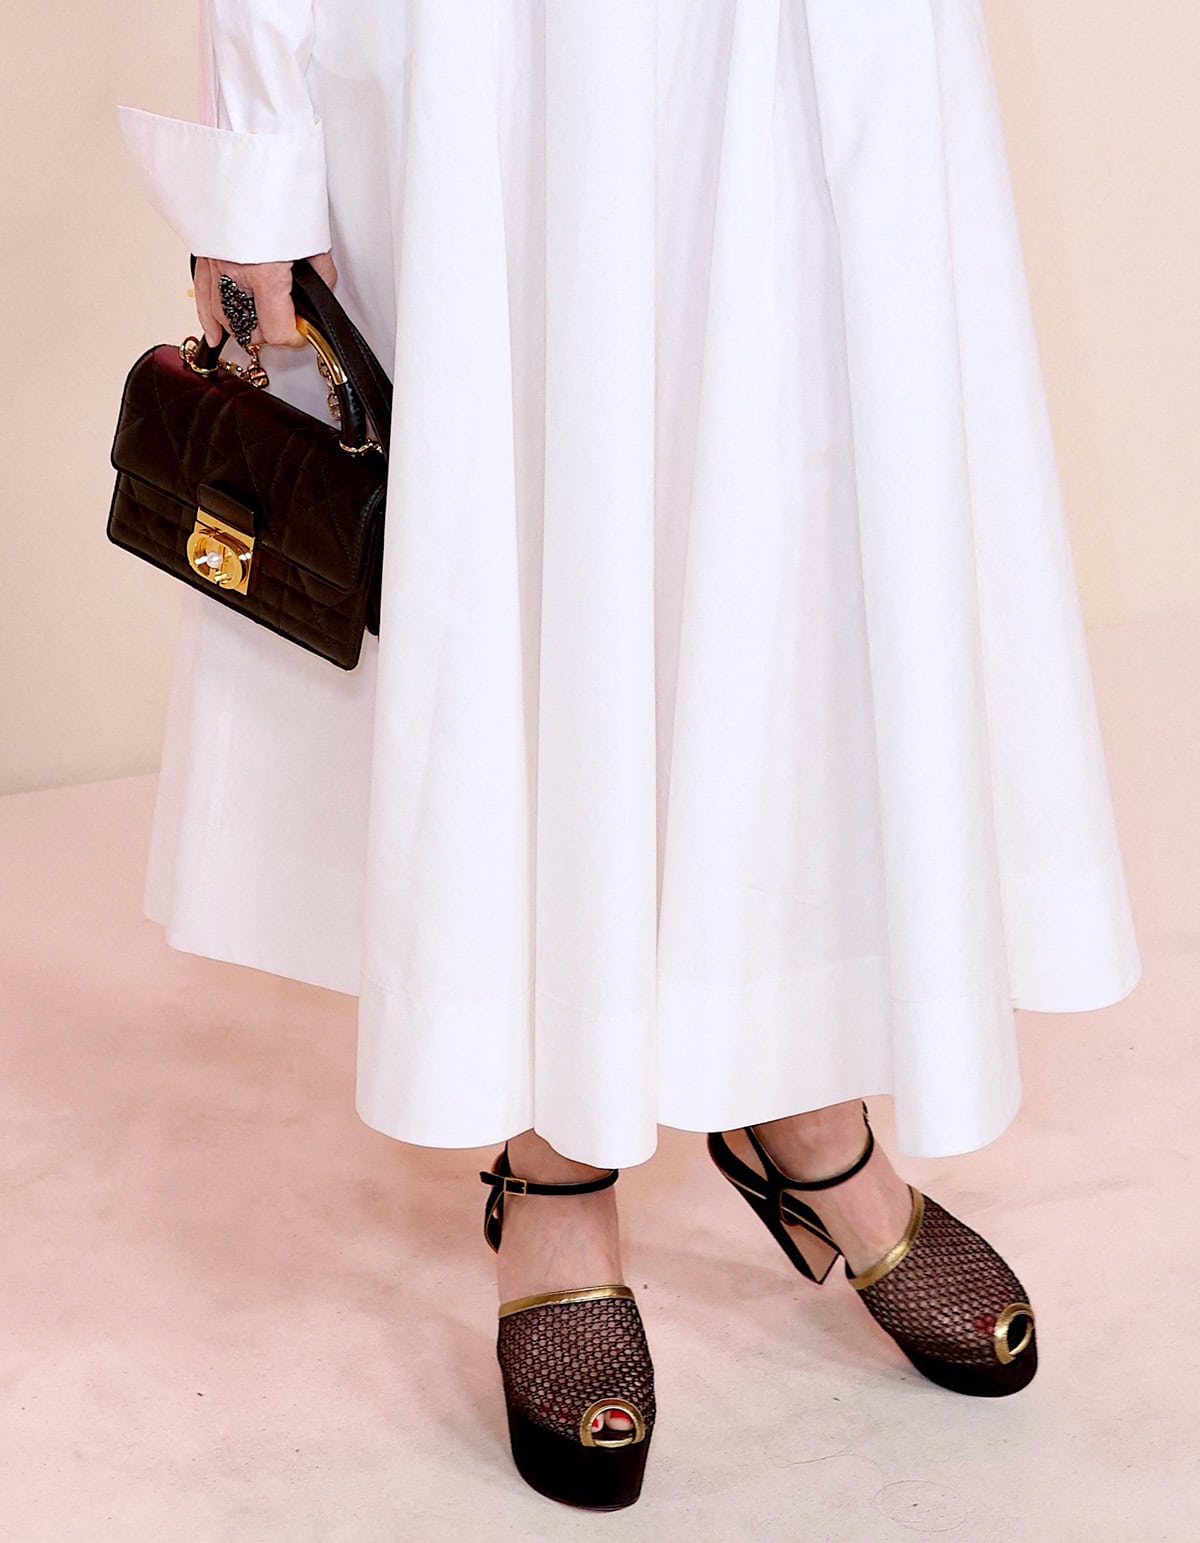 Naomi Watts teams her white dress with black-and-gold Dior peep-toe sandals with thick heels and platforms, boosting her height by several inches